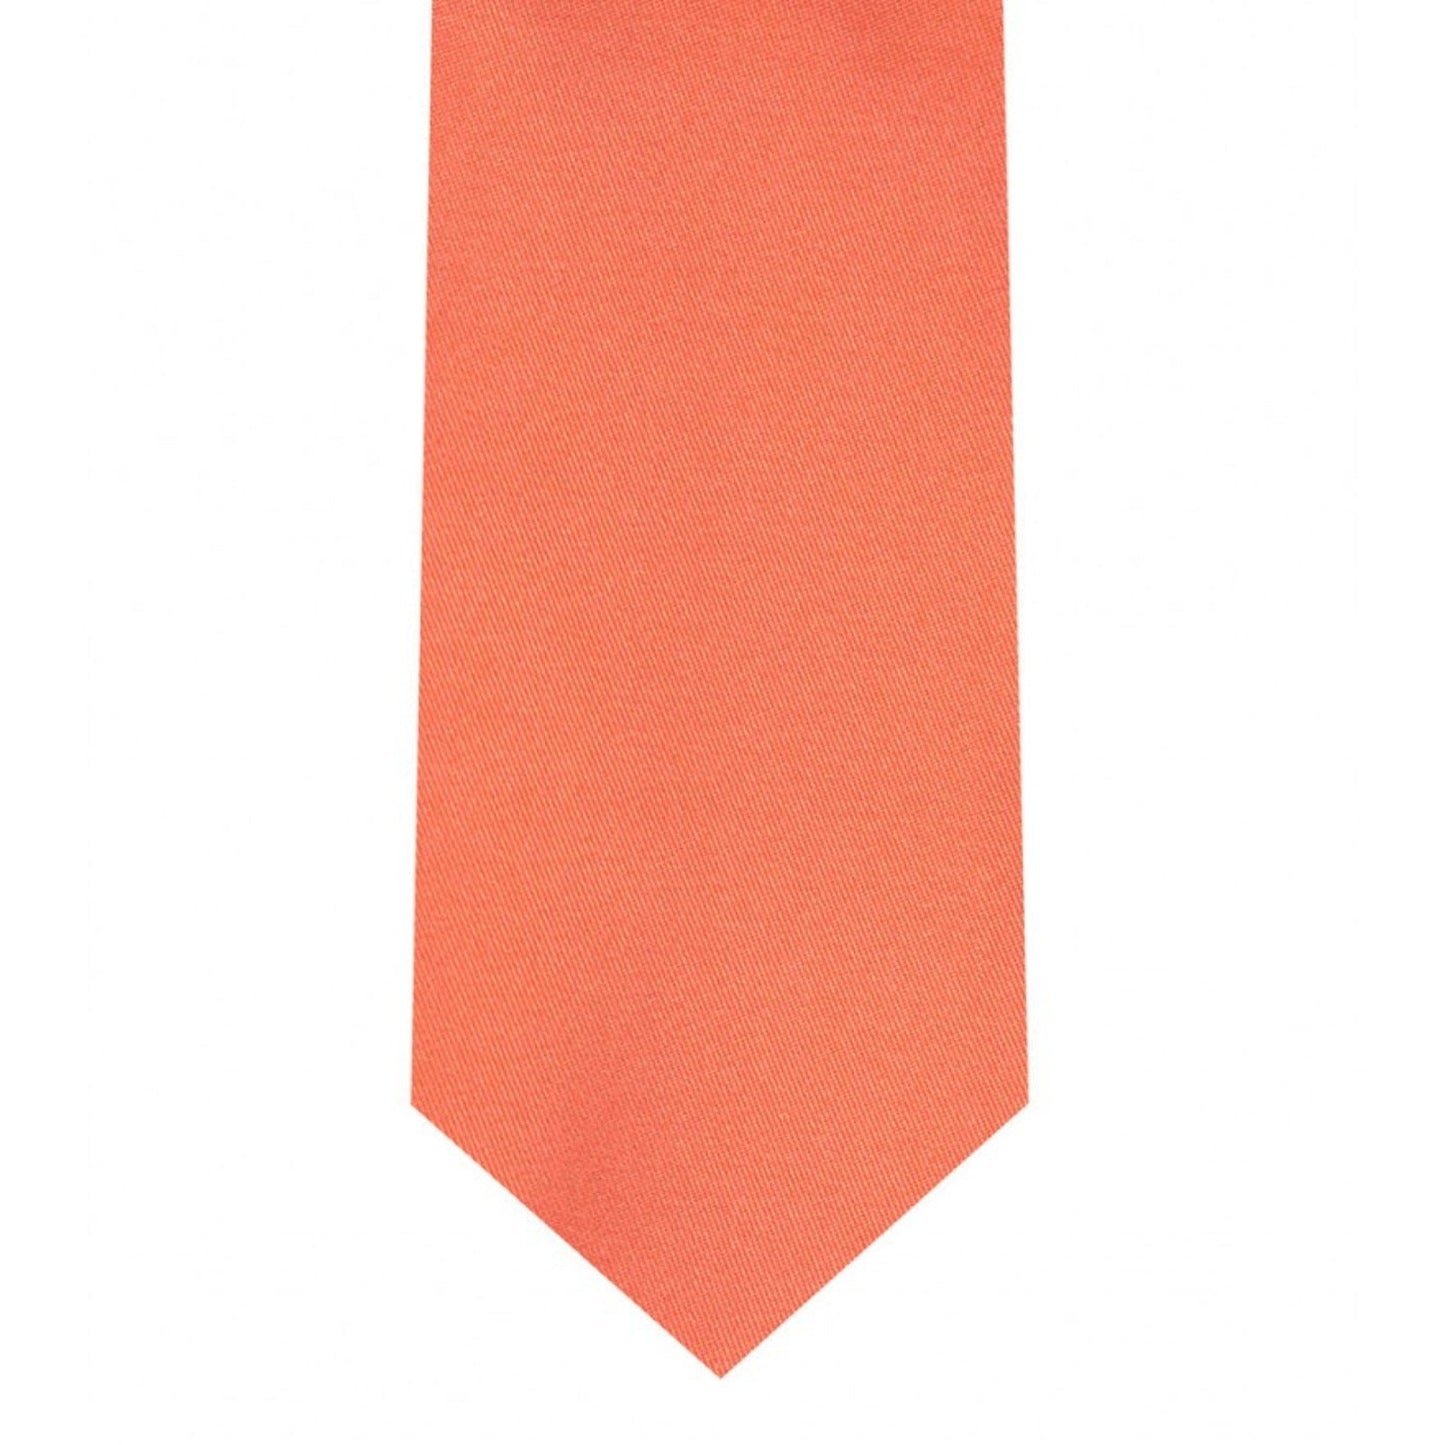 Classic Coral Tie Skinny width 2.75 inches With Matching Pocket Square | KCT Menswear